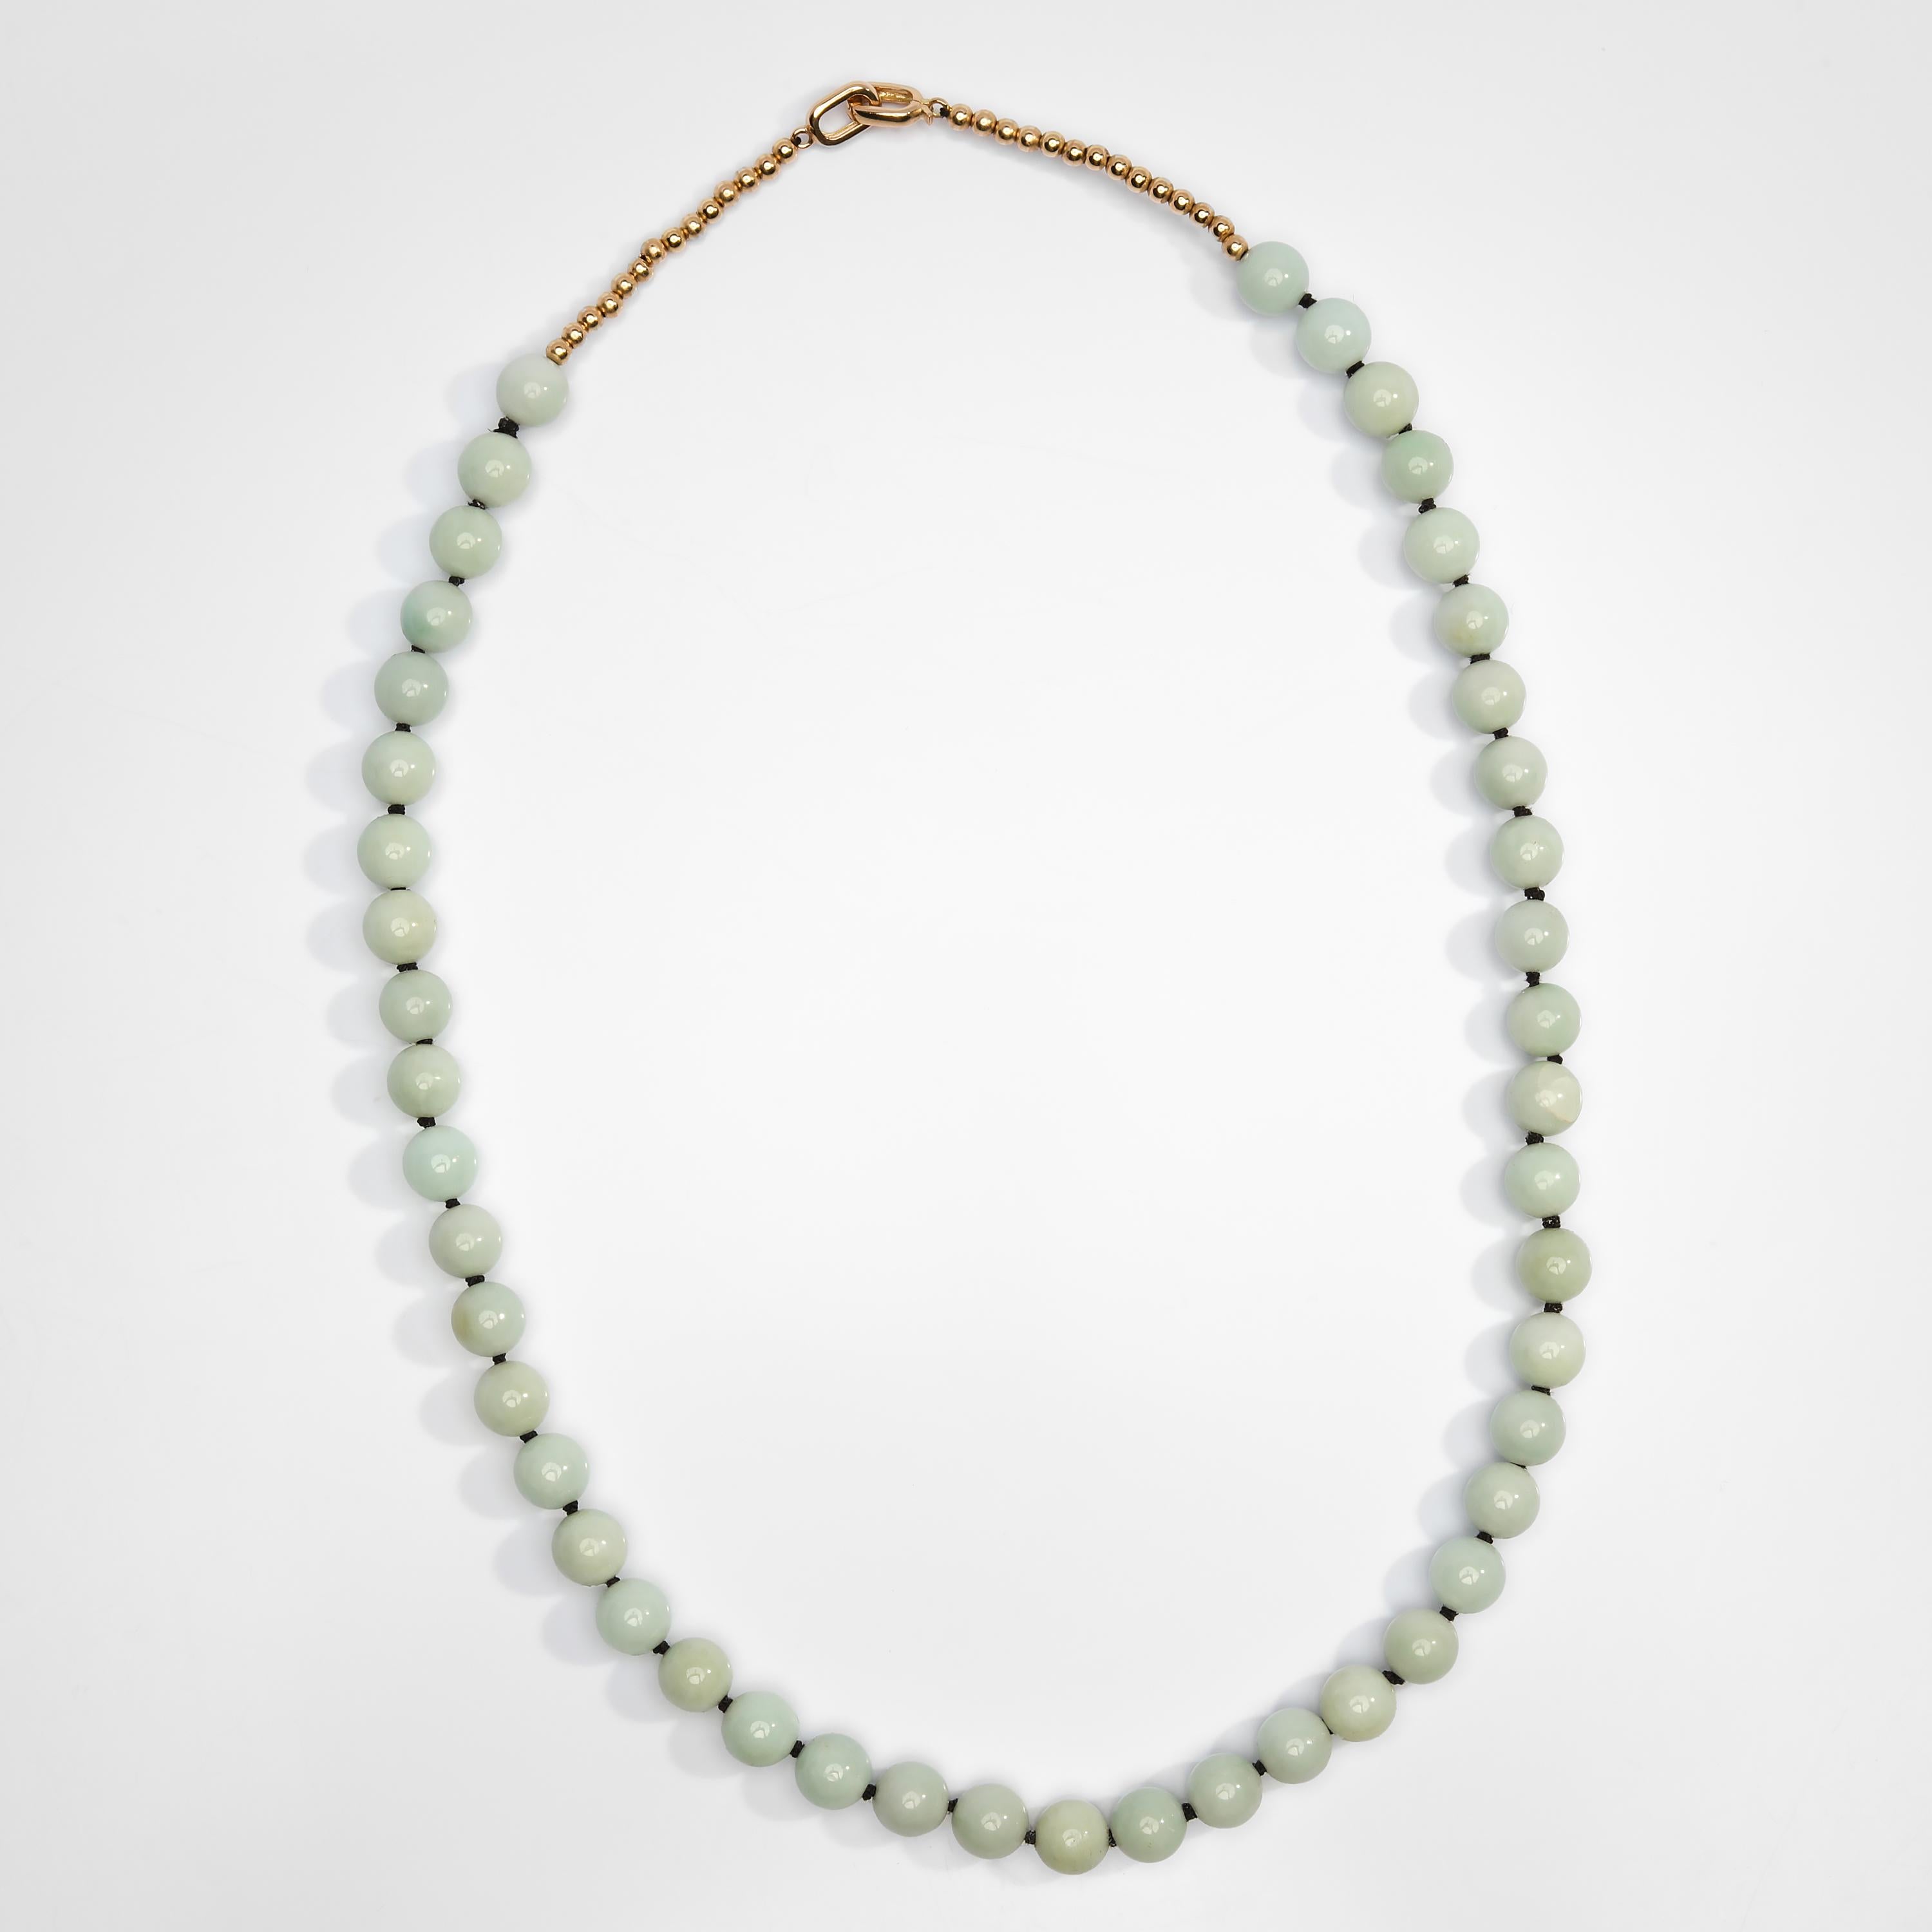 Jade Necklace of Soft Bluish-Green Jadeite is Unexpectedly Sublime 3